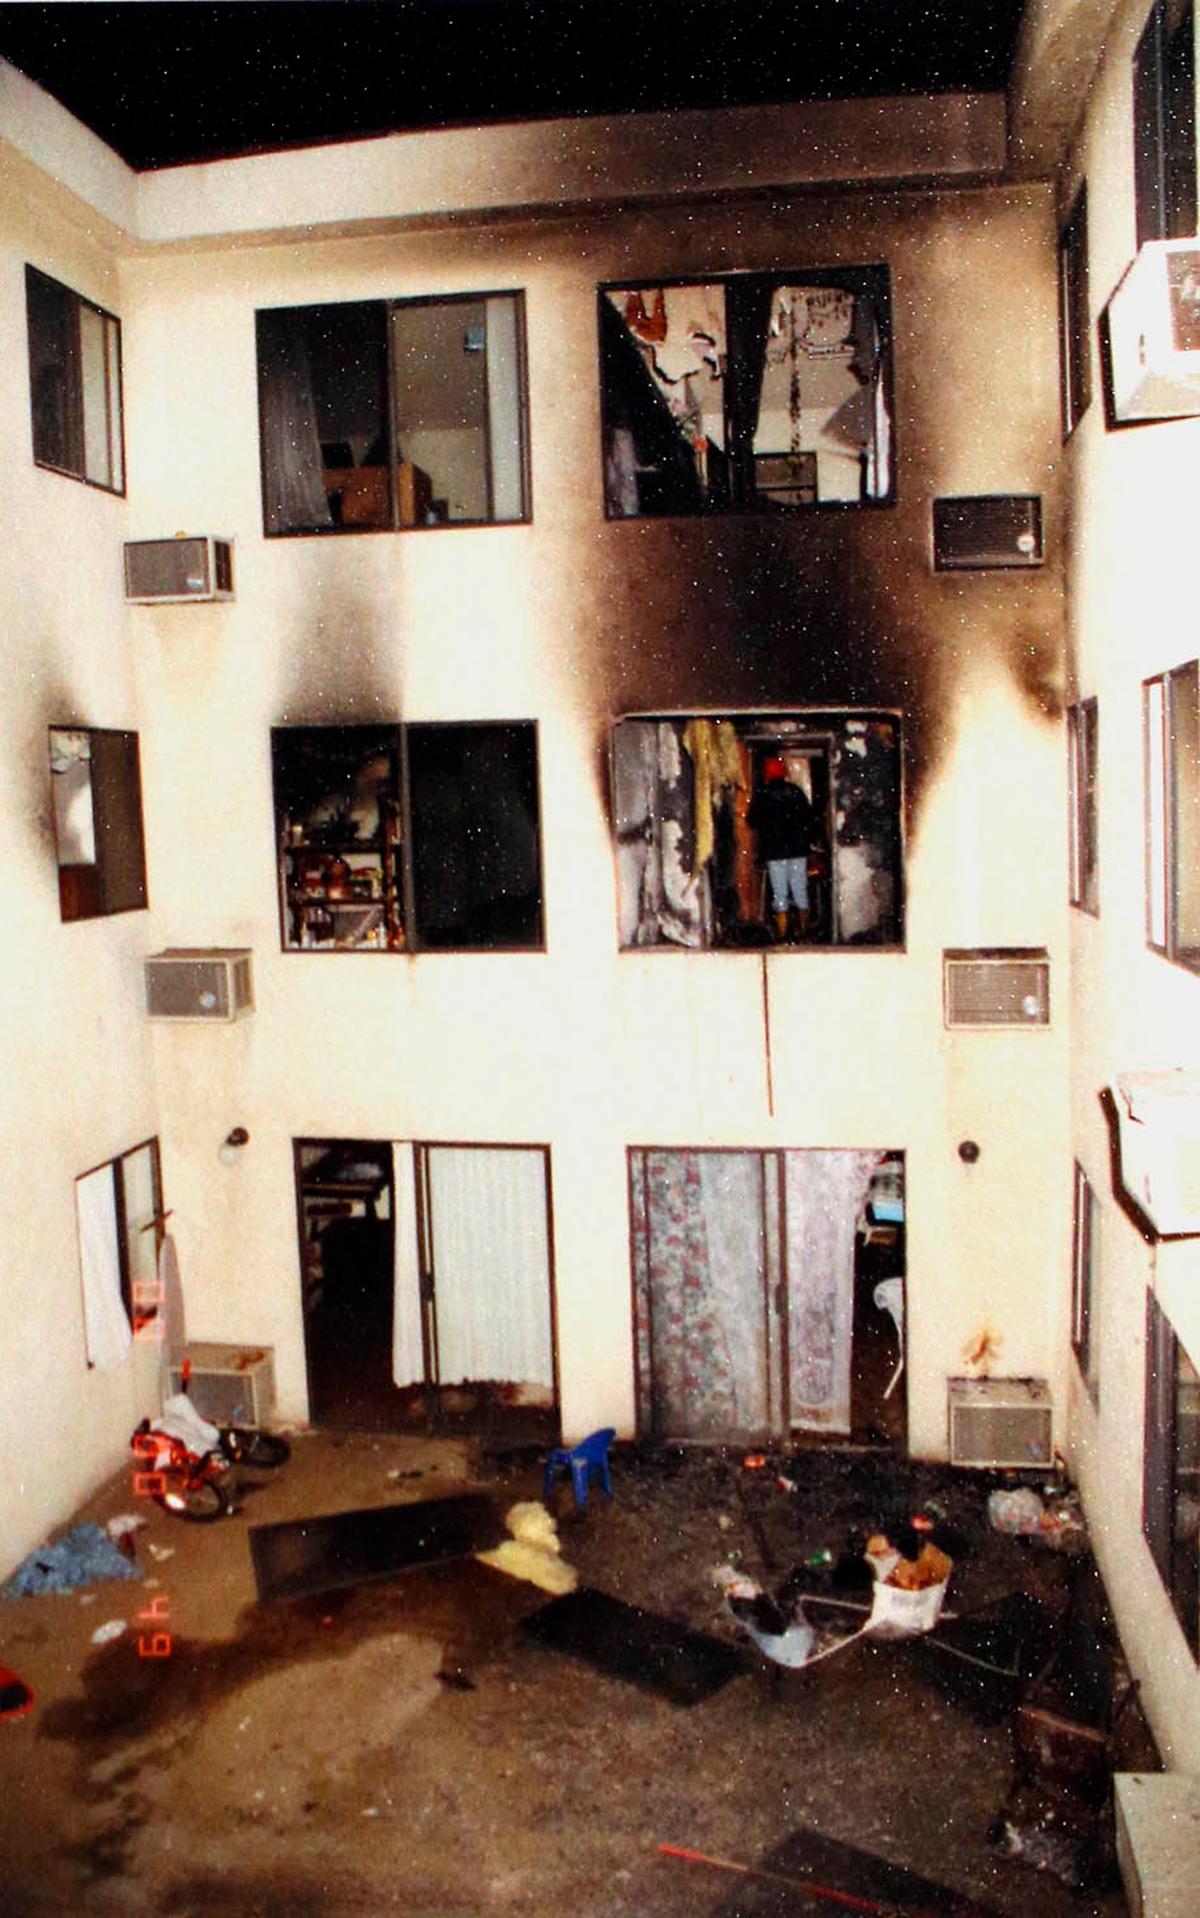 The scene of a deadly fire that struck an apartment building in the Westlake district of Los Angeles, taking the lives of 12 people including the deaths of late-term fetuses. (Los Angeles Police Department via AP)